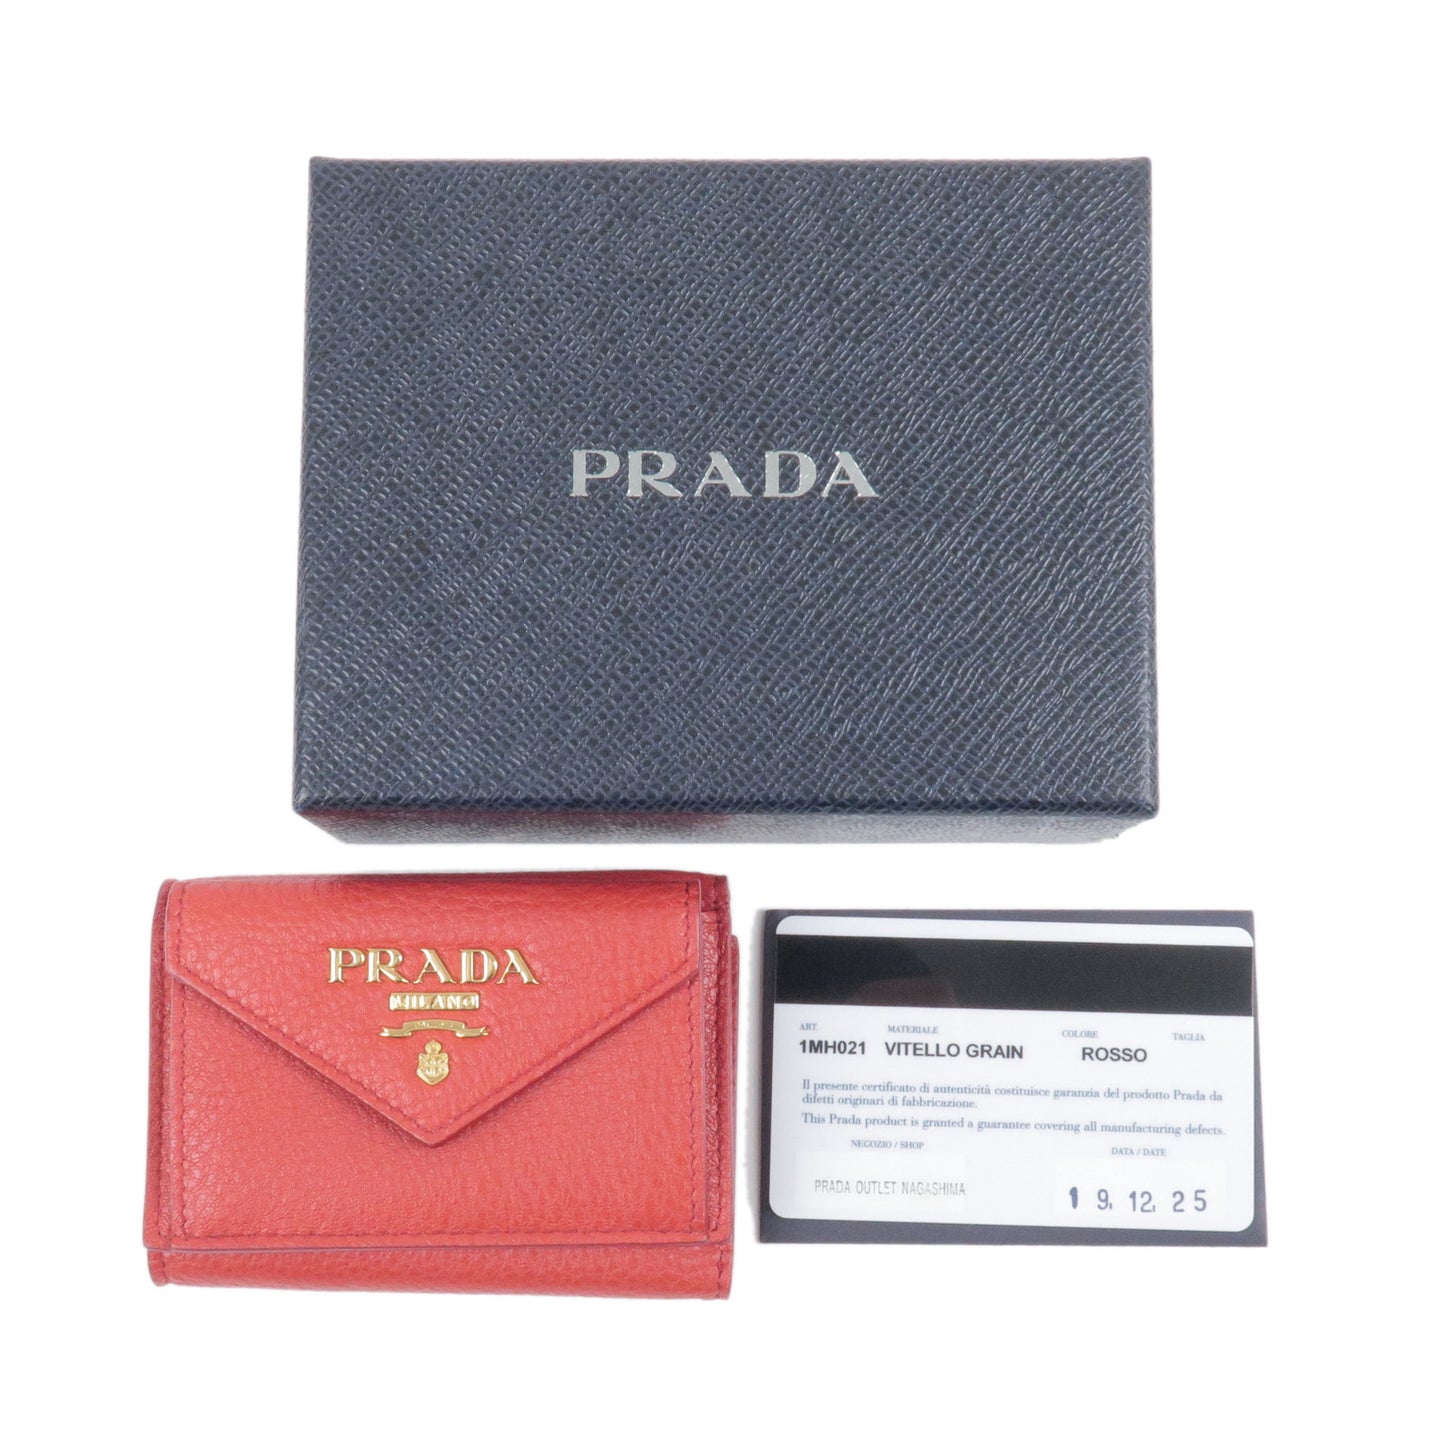 PRADA Leather Trifold Wallet Coin Case ROSSO Red 1MH021